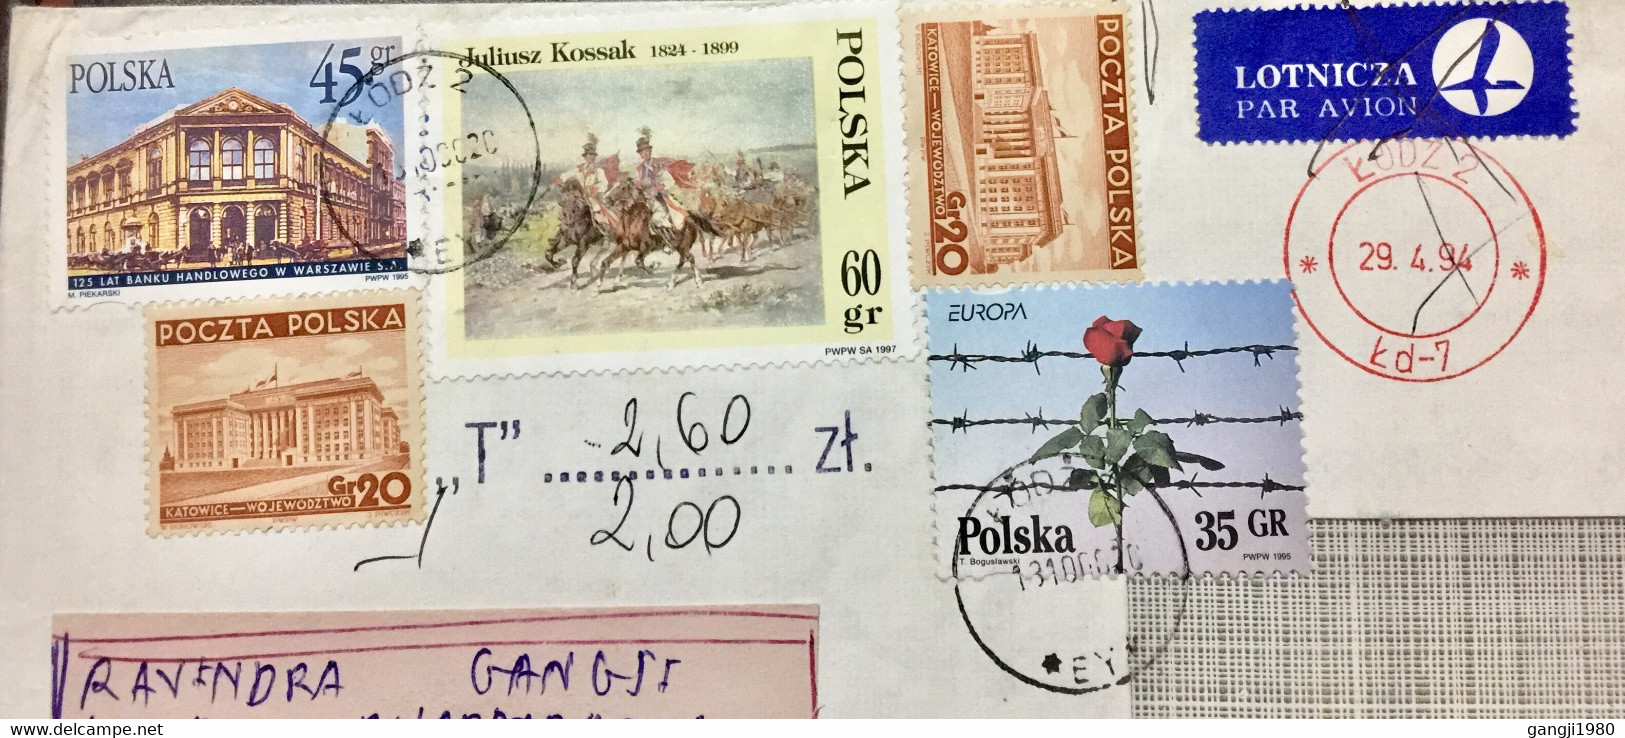 POLAND 2000 ,AIRMAIL METER FRANKED 1994, REUSED COVER EARLY STAMP REJECTED SU DUE “T” 260 ZT, BUILDING,HORSE,FLOWER,PLAN - Covers & Documents